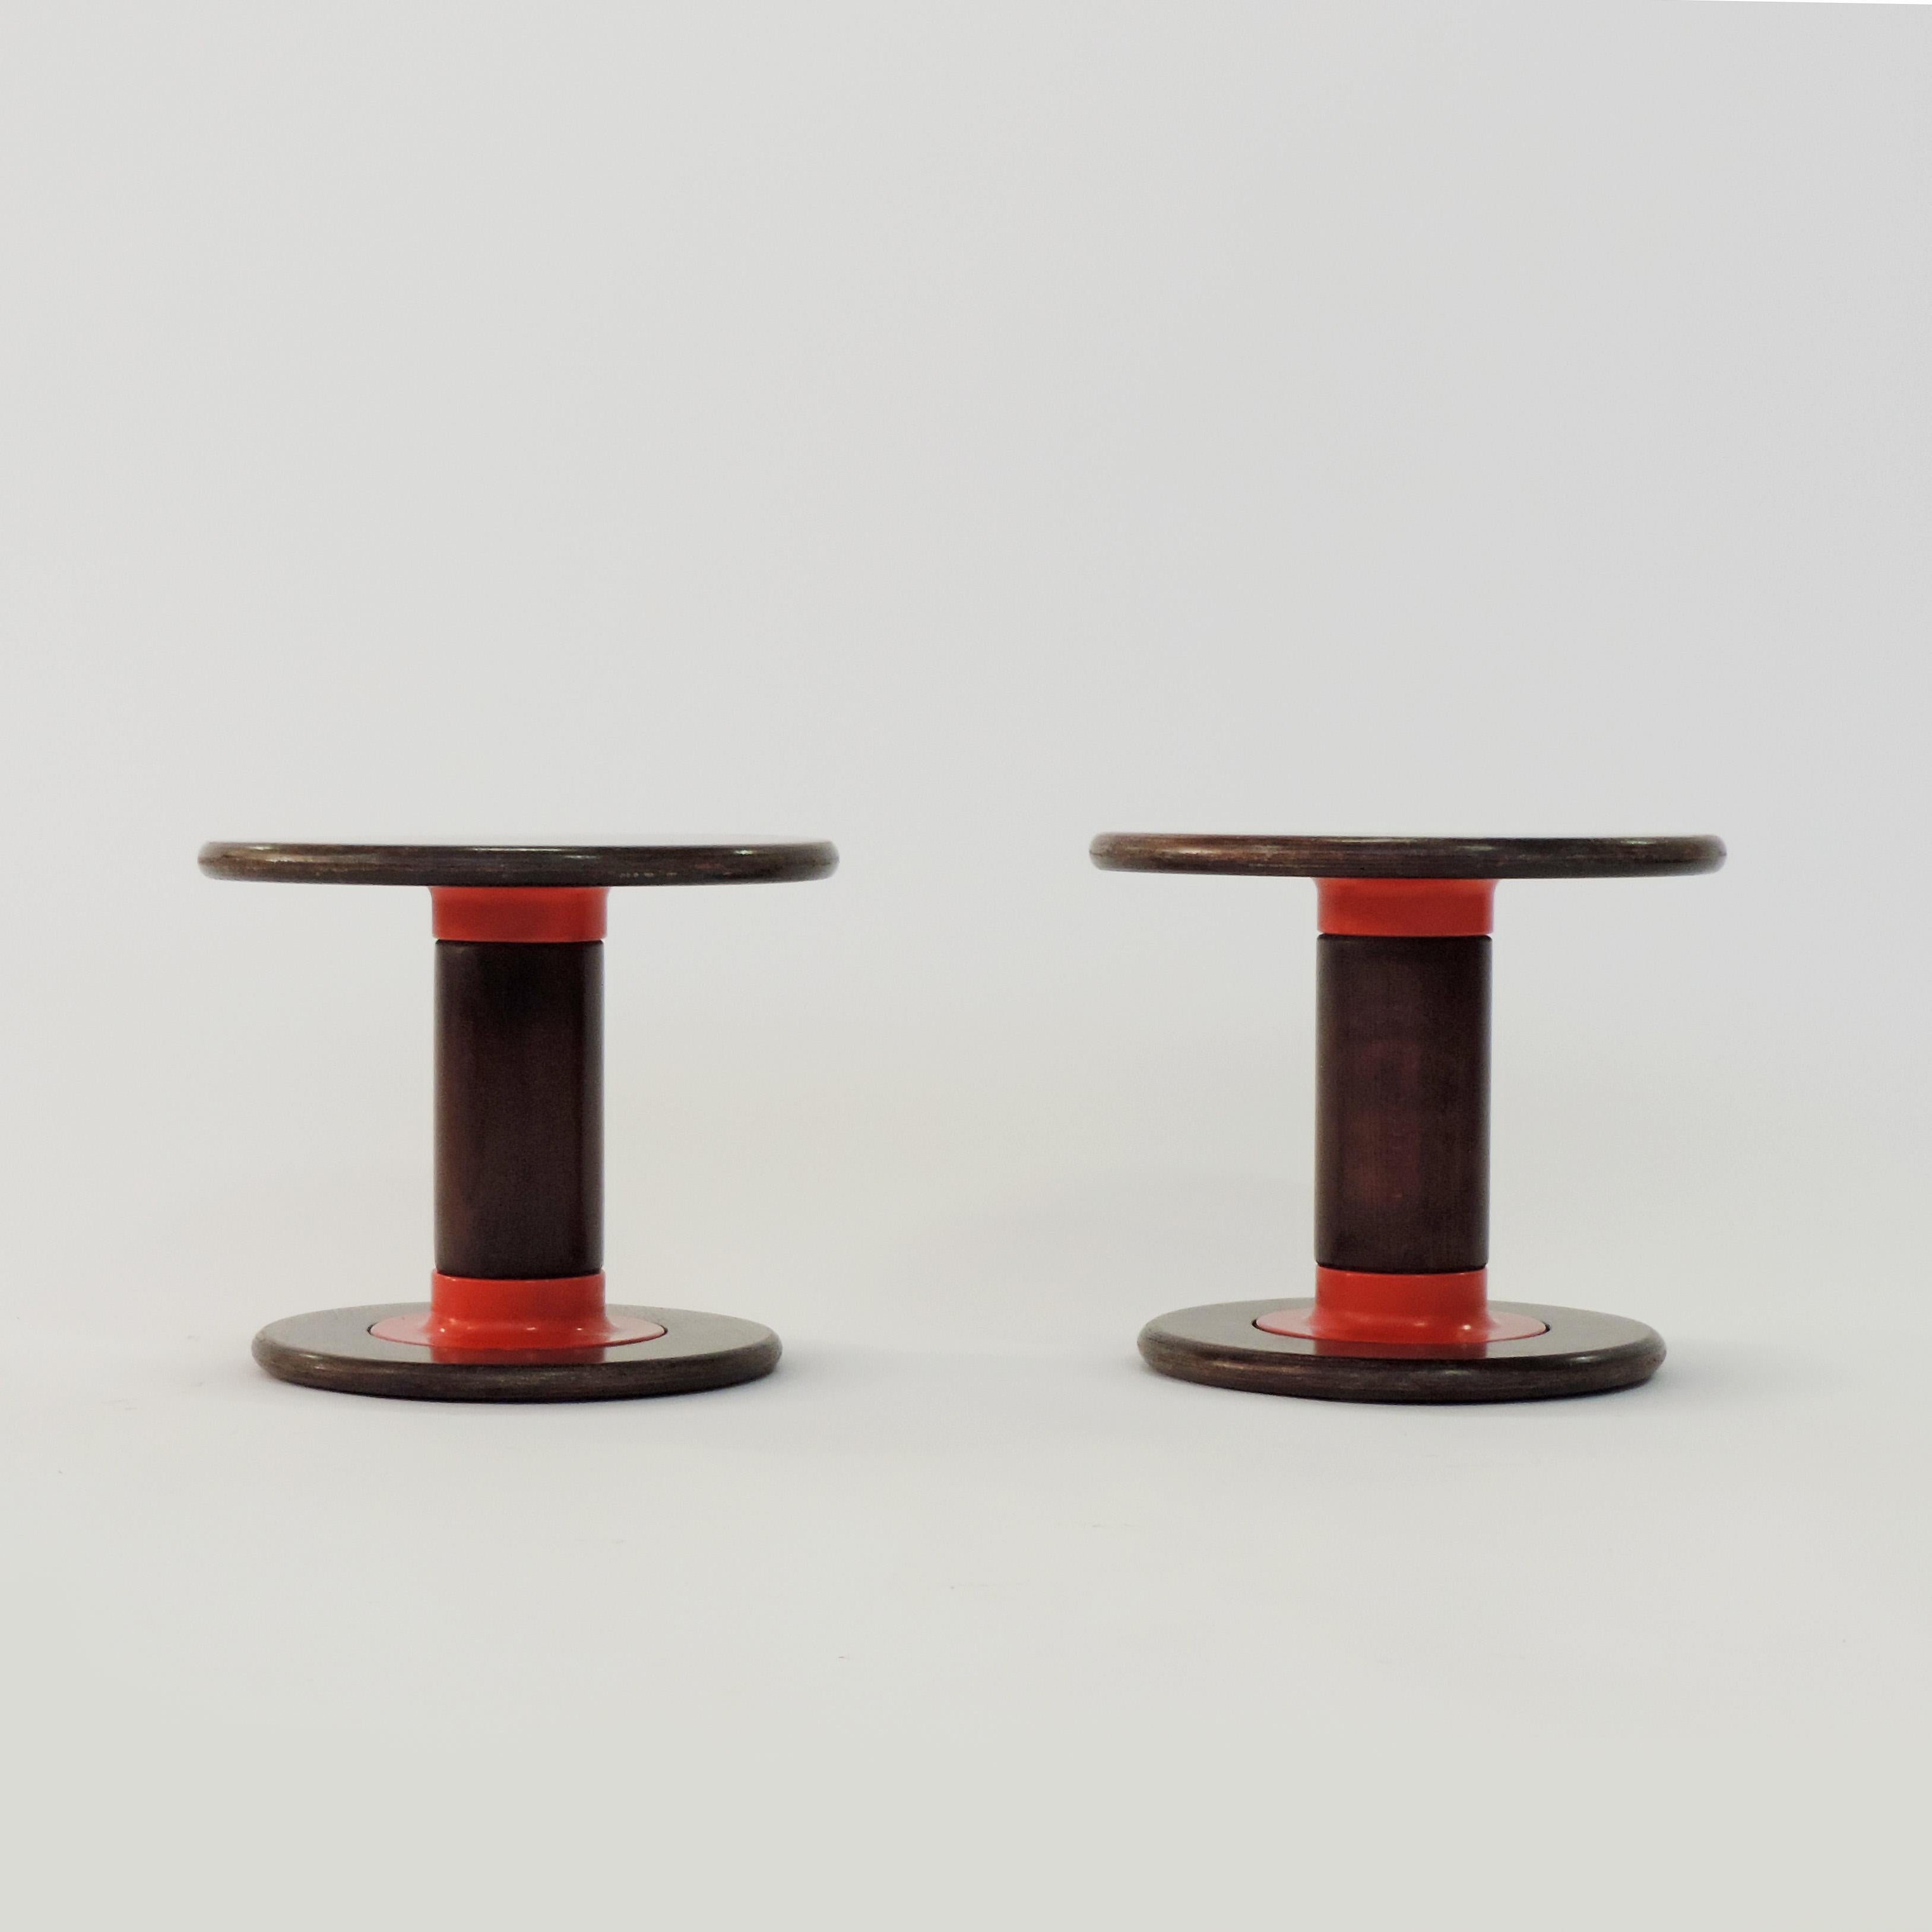 Wood Ettore Sottsass Jr. Pair of Rocchettone Side Tables for Poltronova, Italy, 1964